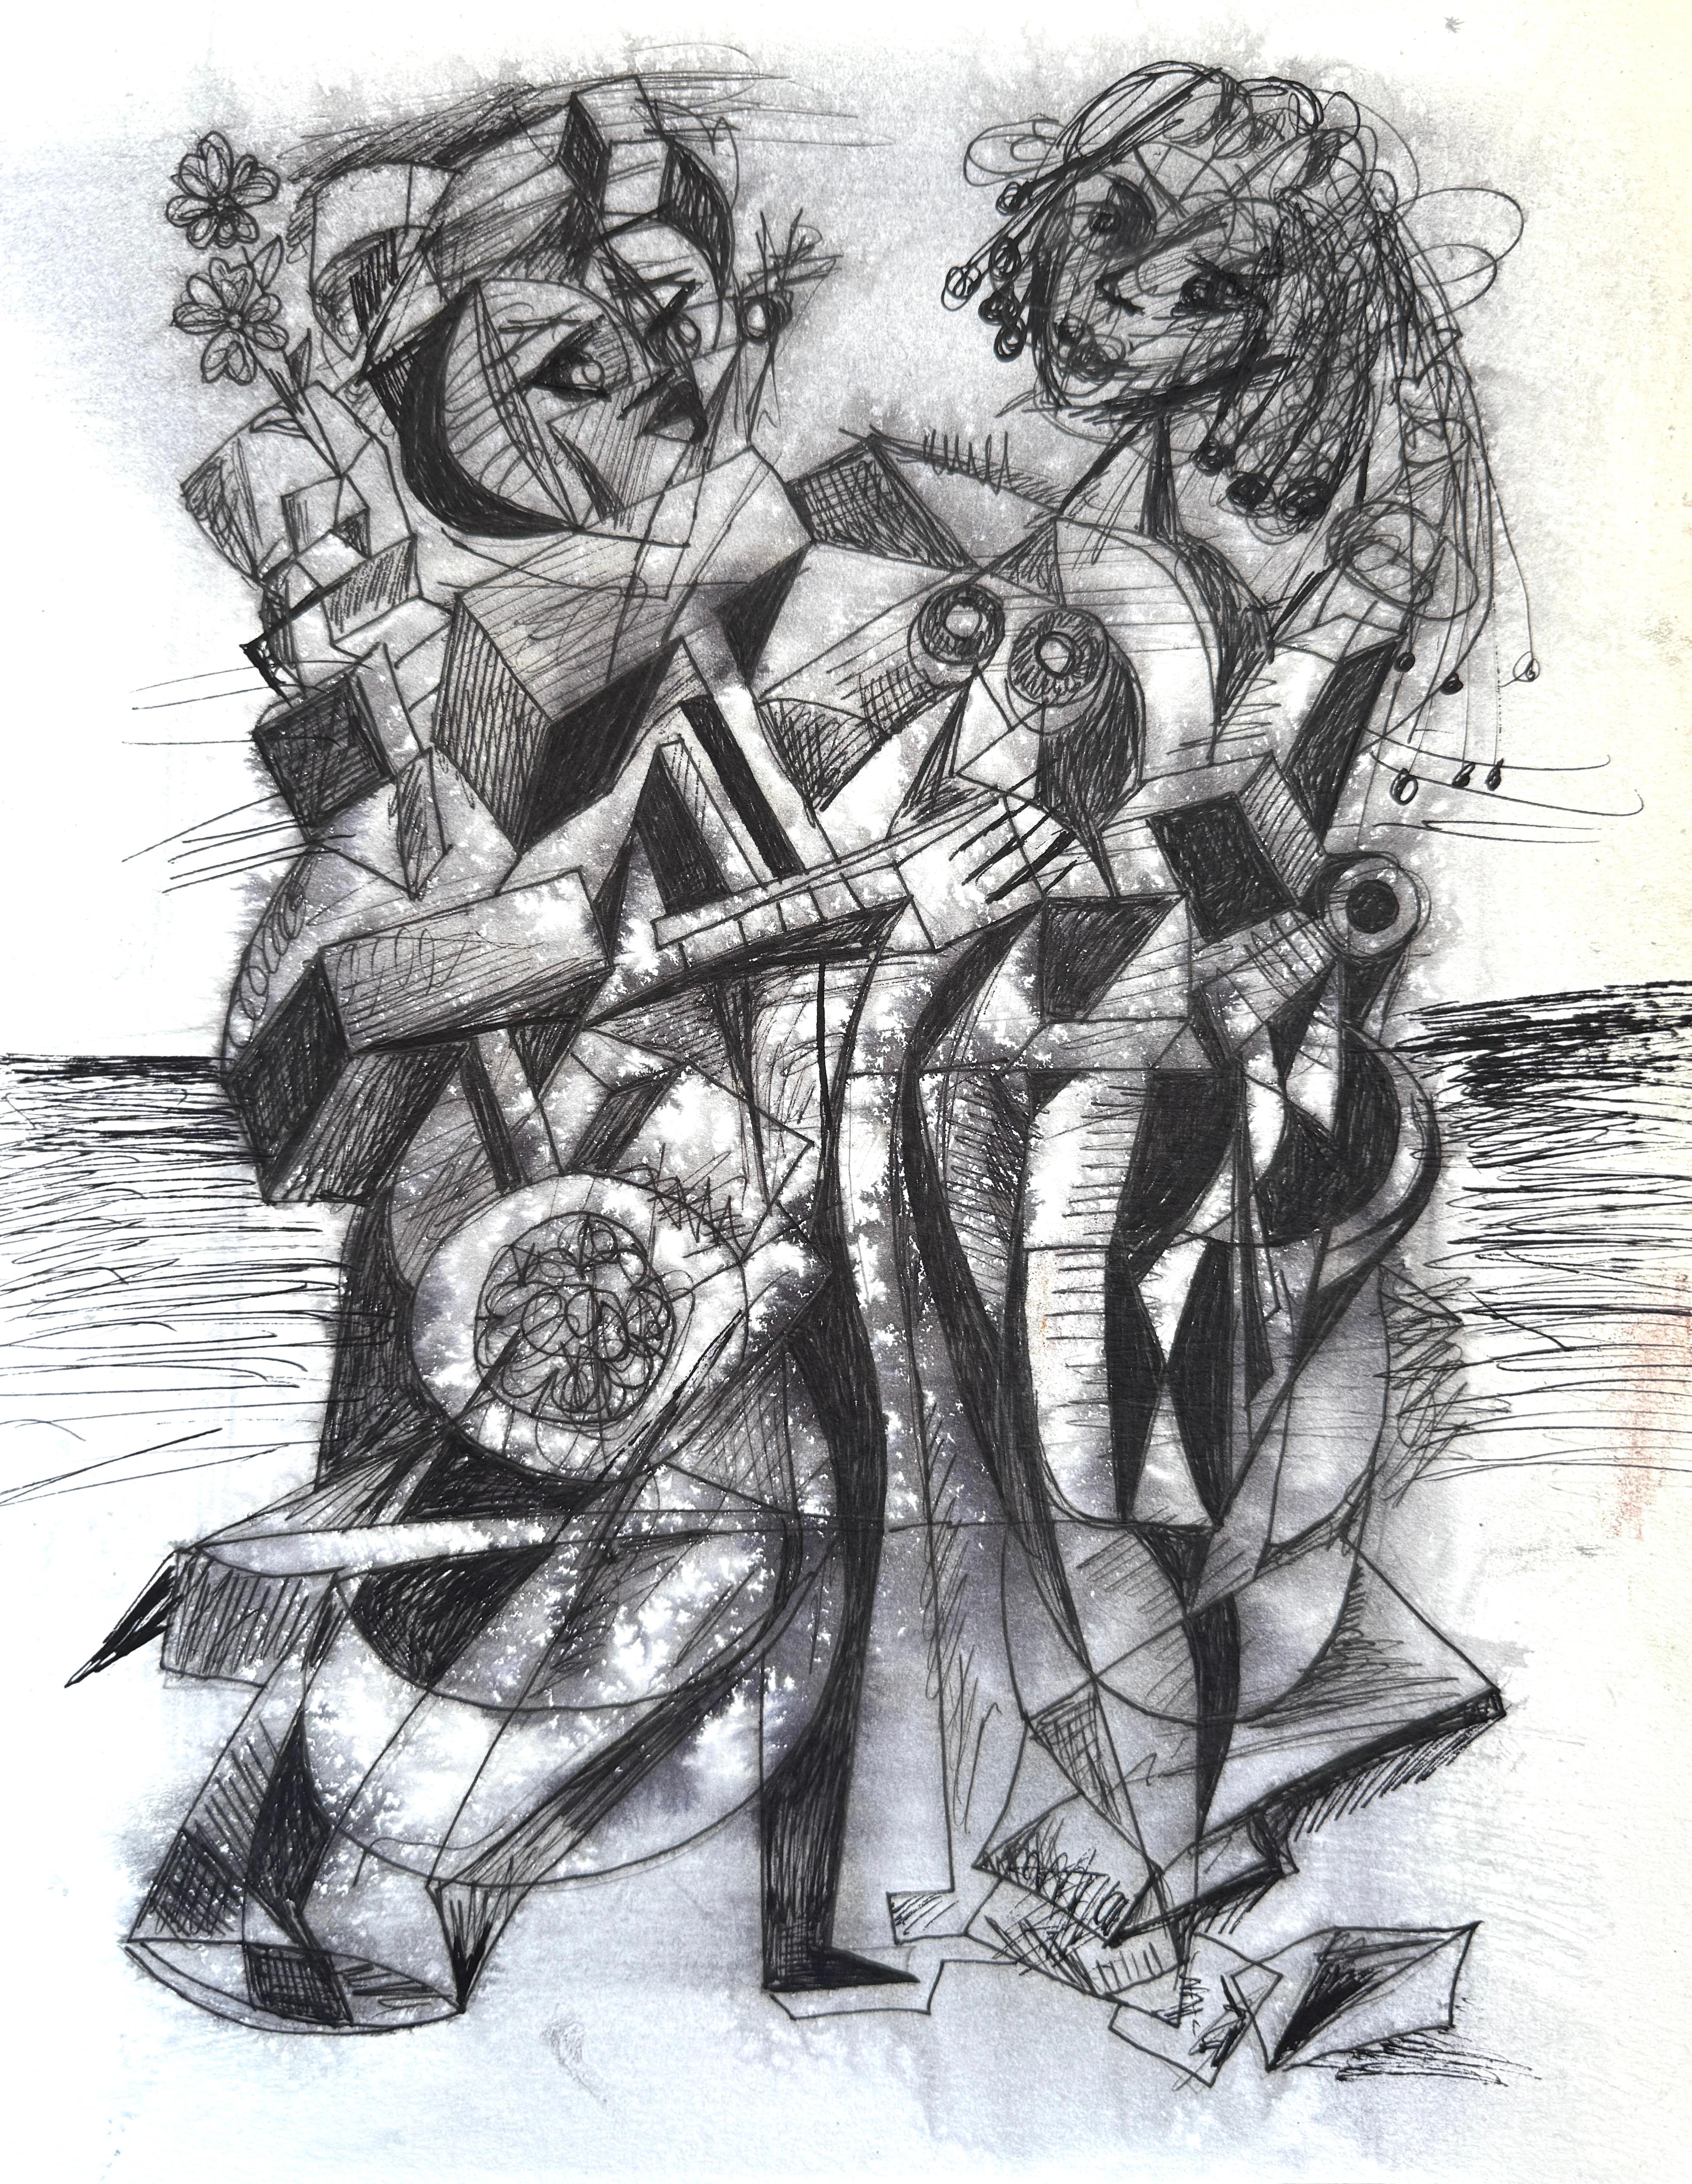 Mkrtich Sarkisyan (Mcho) Figurative Art - Hug, Abstract Figurative, Original Painting, Ink on Paper, Black and White 